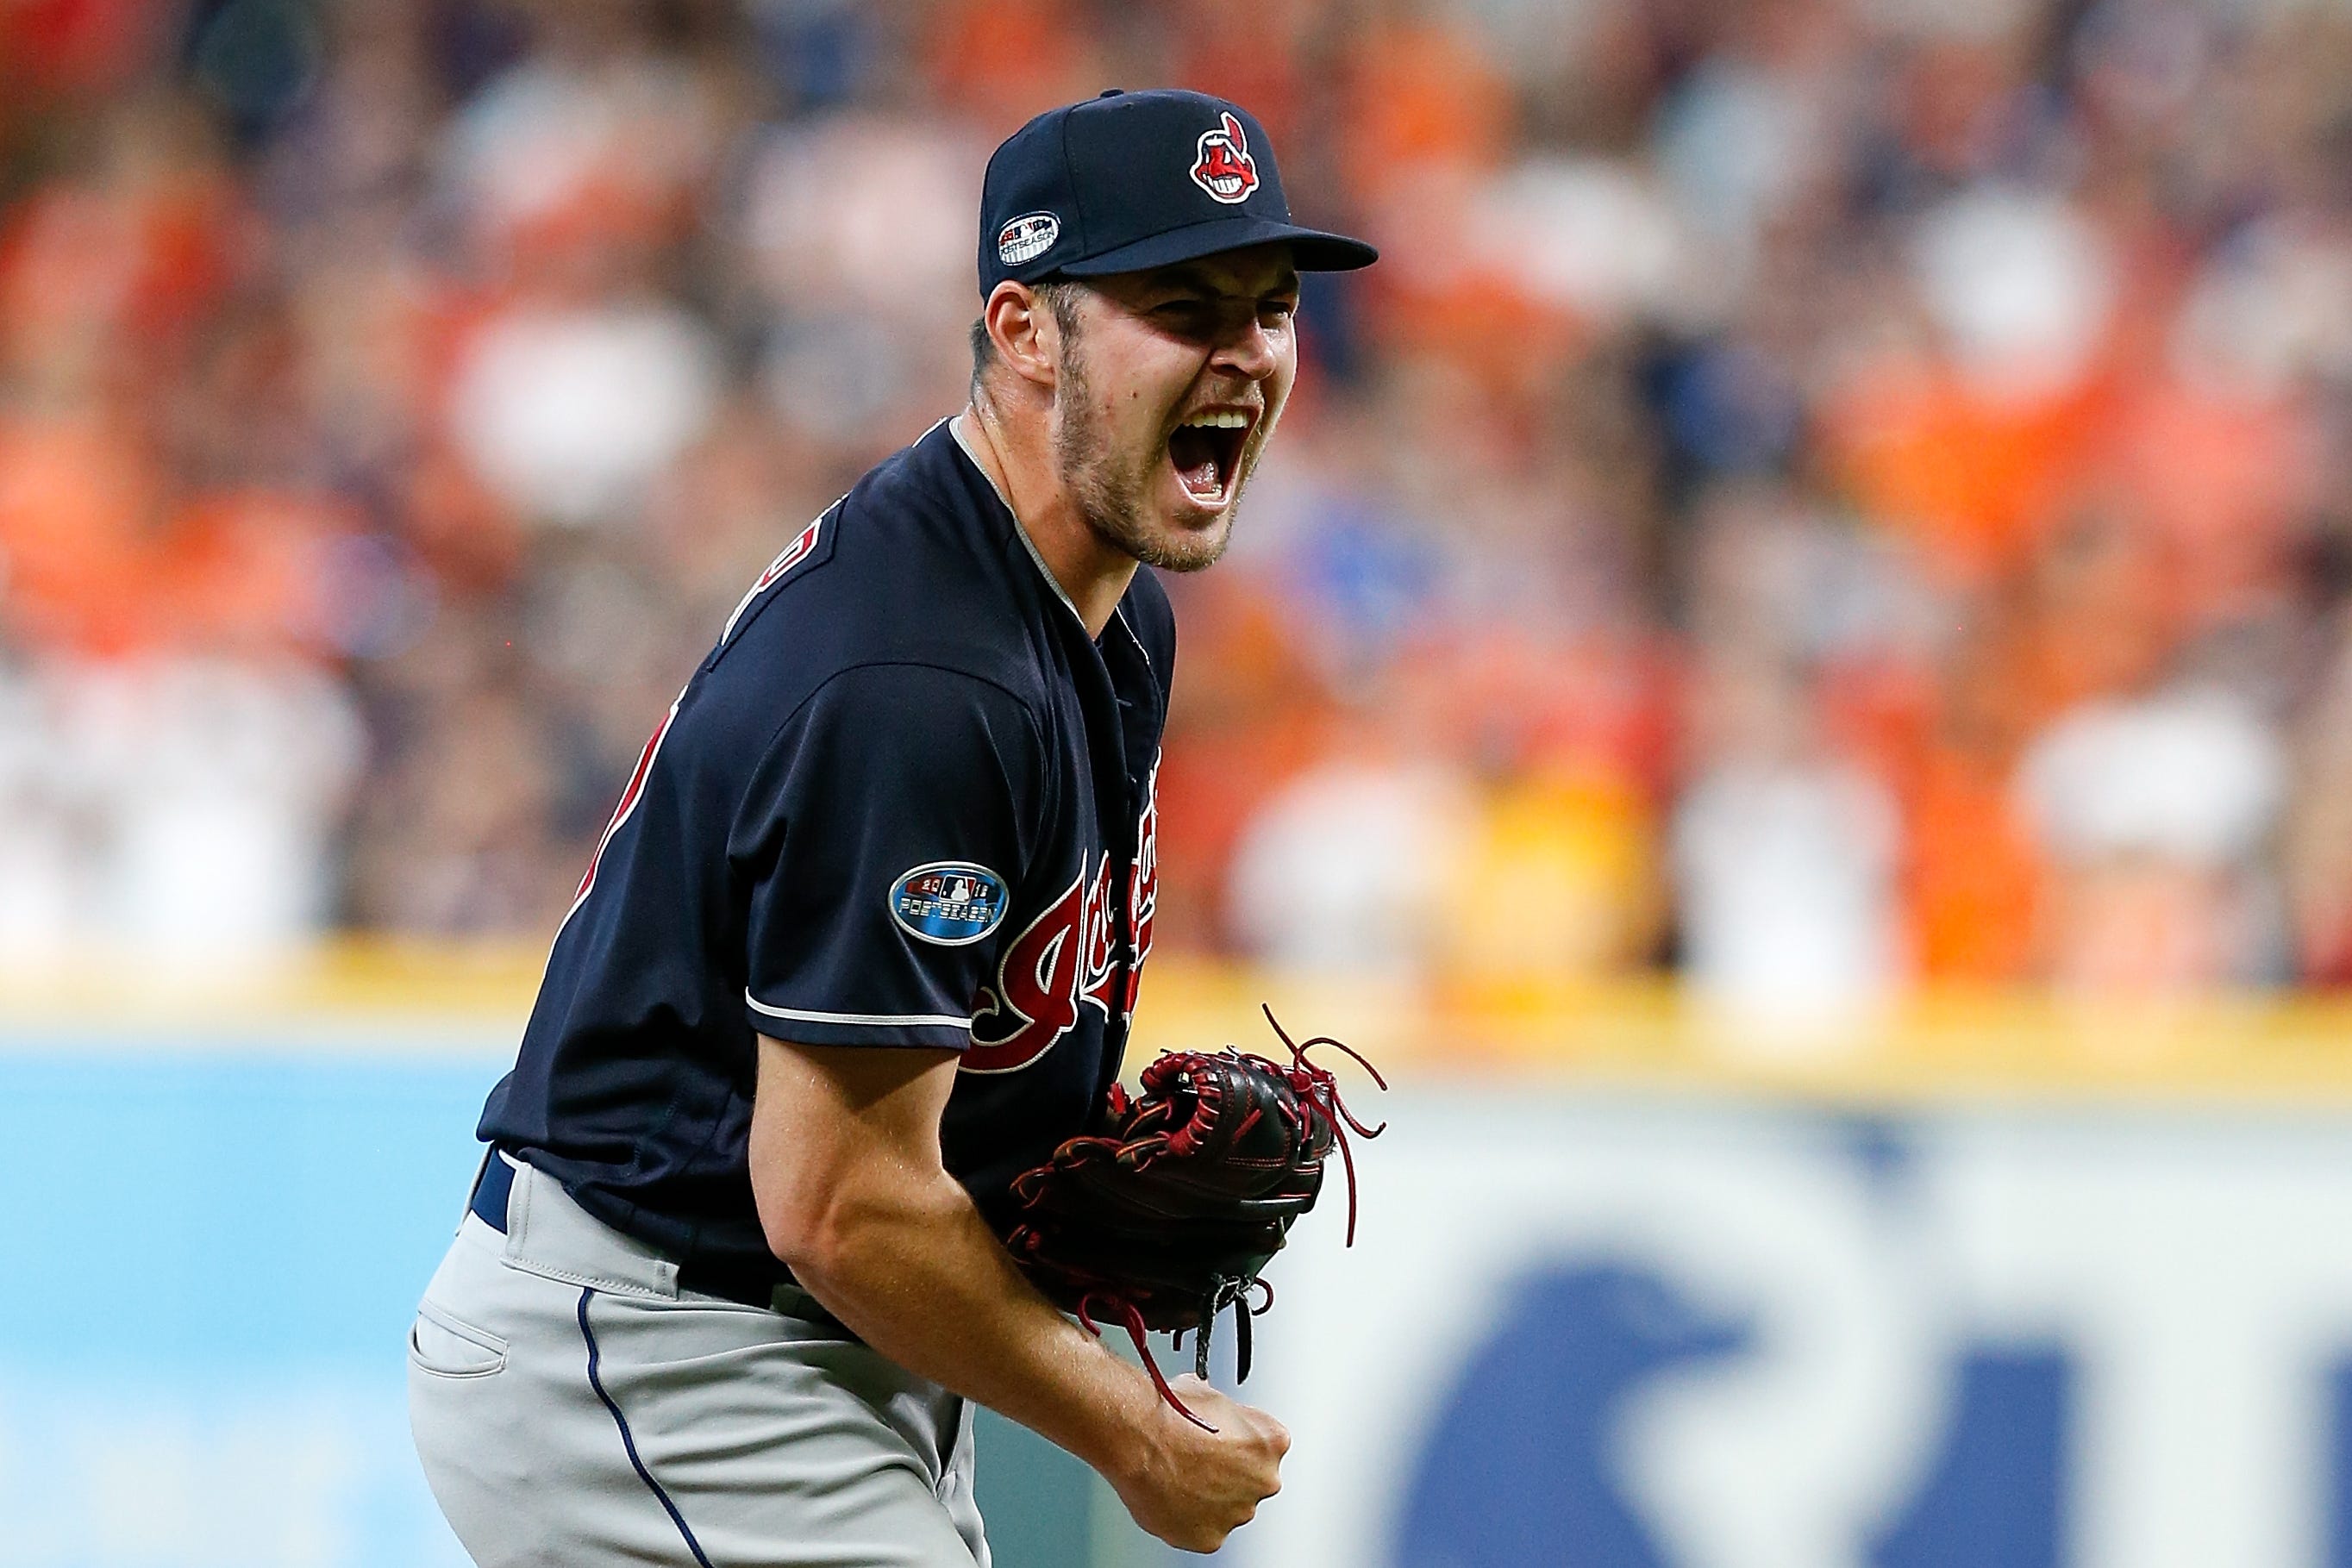 Indians starting pitcher Trevor Bauer is coming off his best season in MLB.